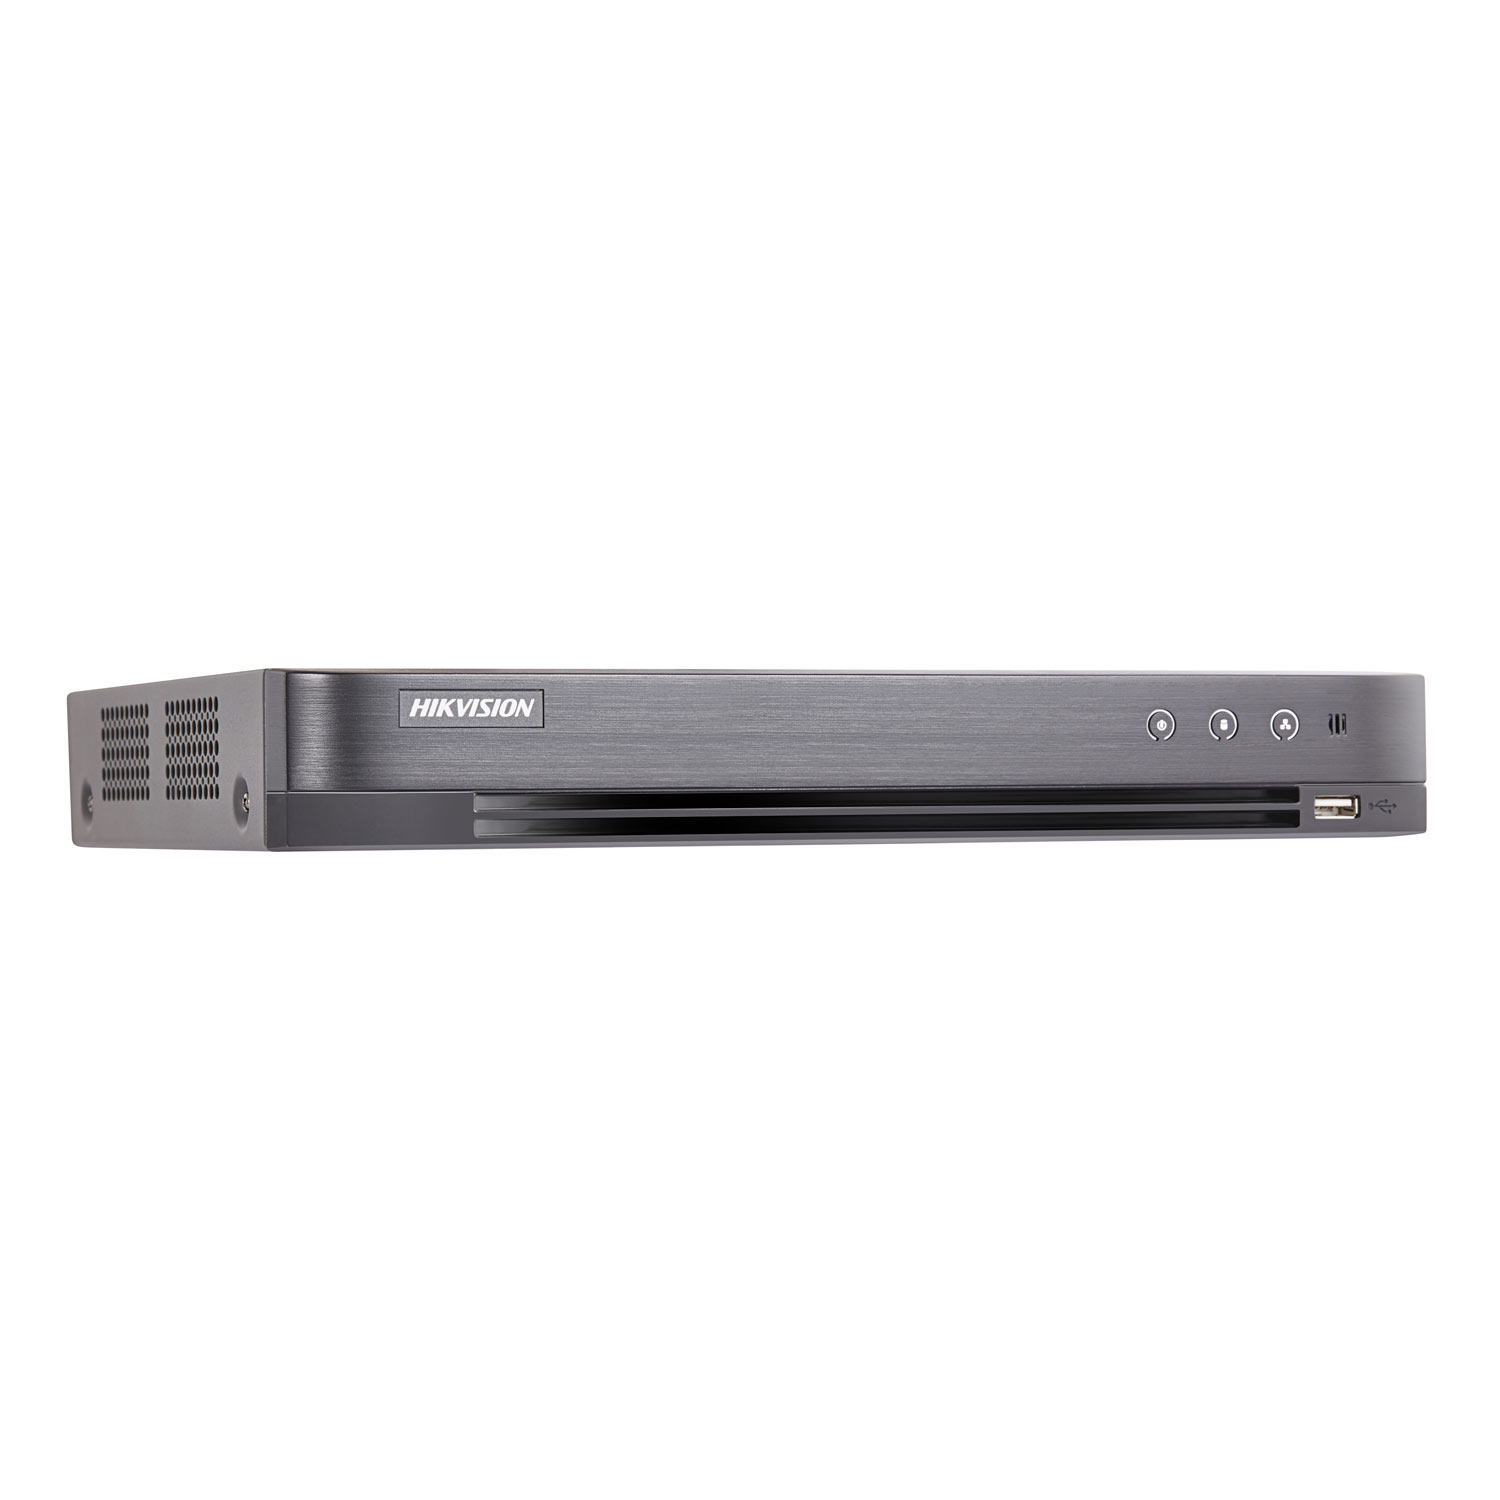 DVR HikVision Turbo HD DS-7204HTHI-K1, 4 canale, 8 MP, audio prin coaxial Hikvision imagine noua tecomm.ro